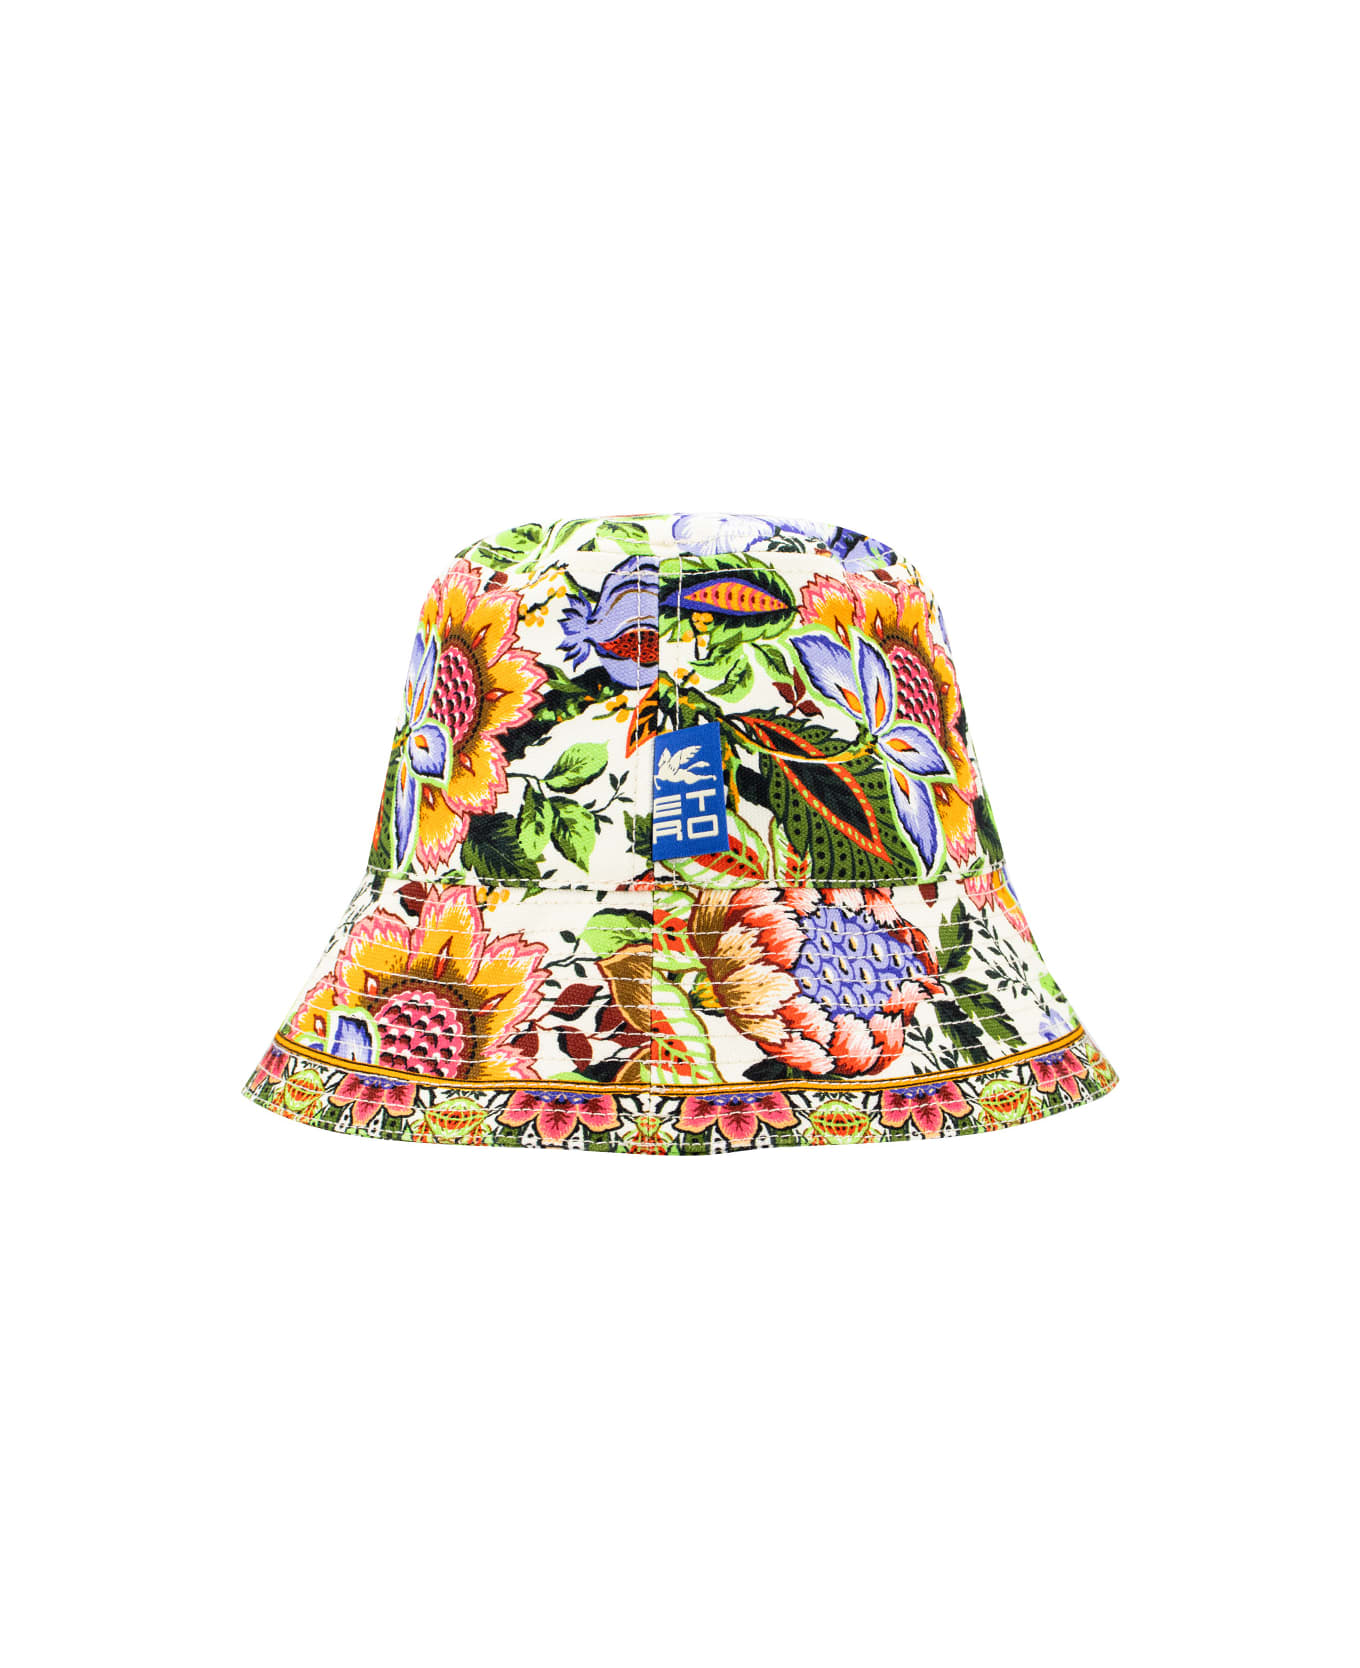 Etro Bucket Hat With Multicolored Print - PRINT ON WHITE BASE